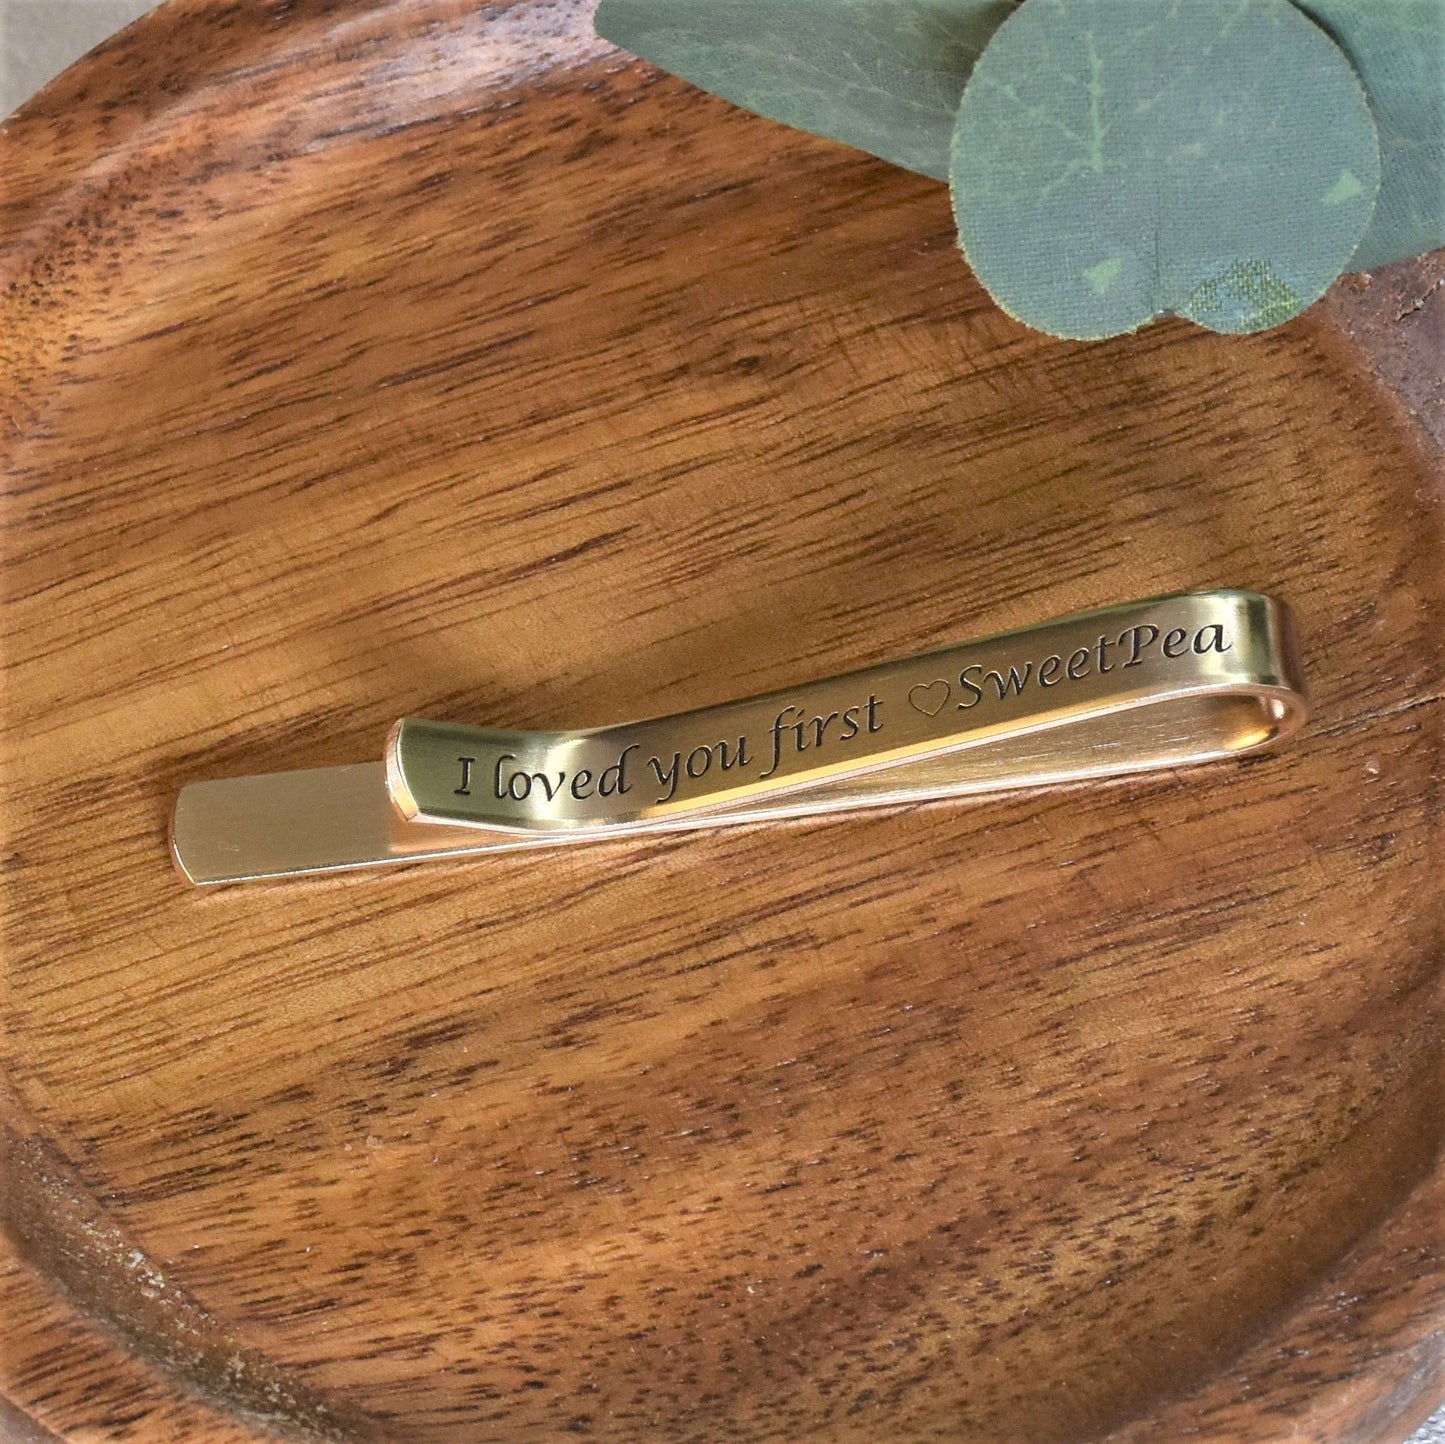 Personalized 2.5 inch long tie clip in gold brass metal.  Featuring engraved calligraphy font, satin finish and blackened text.